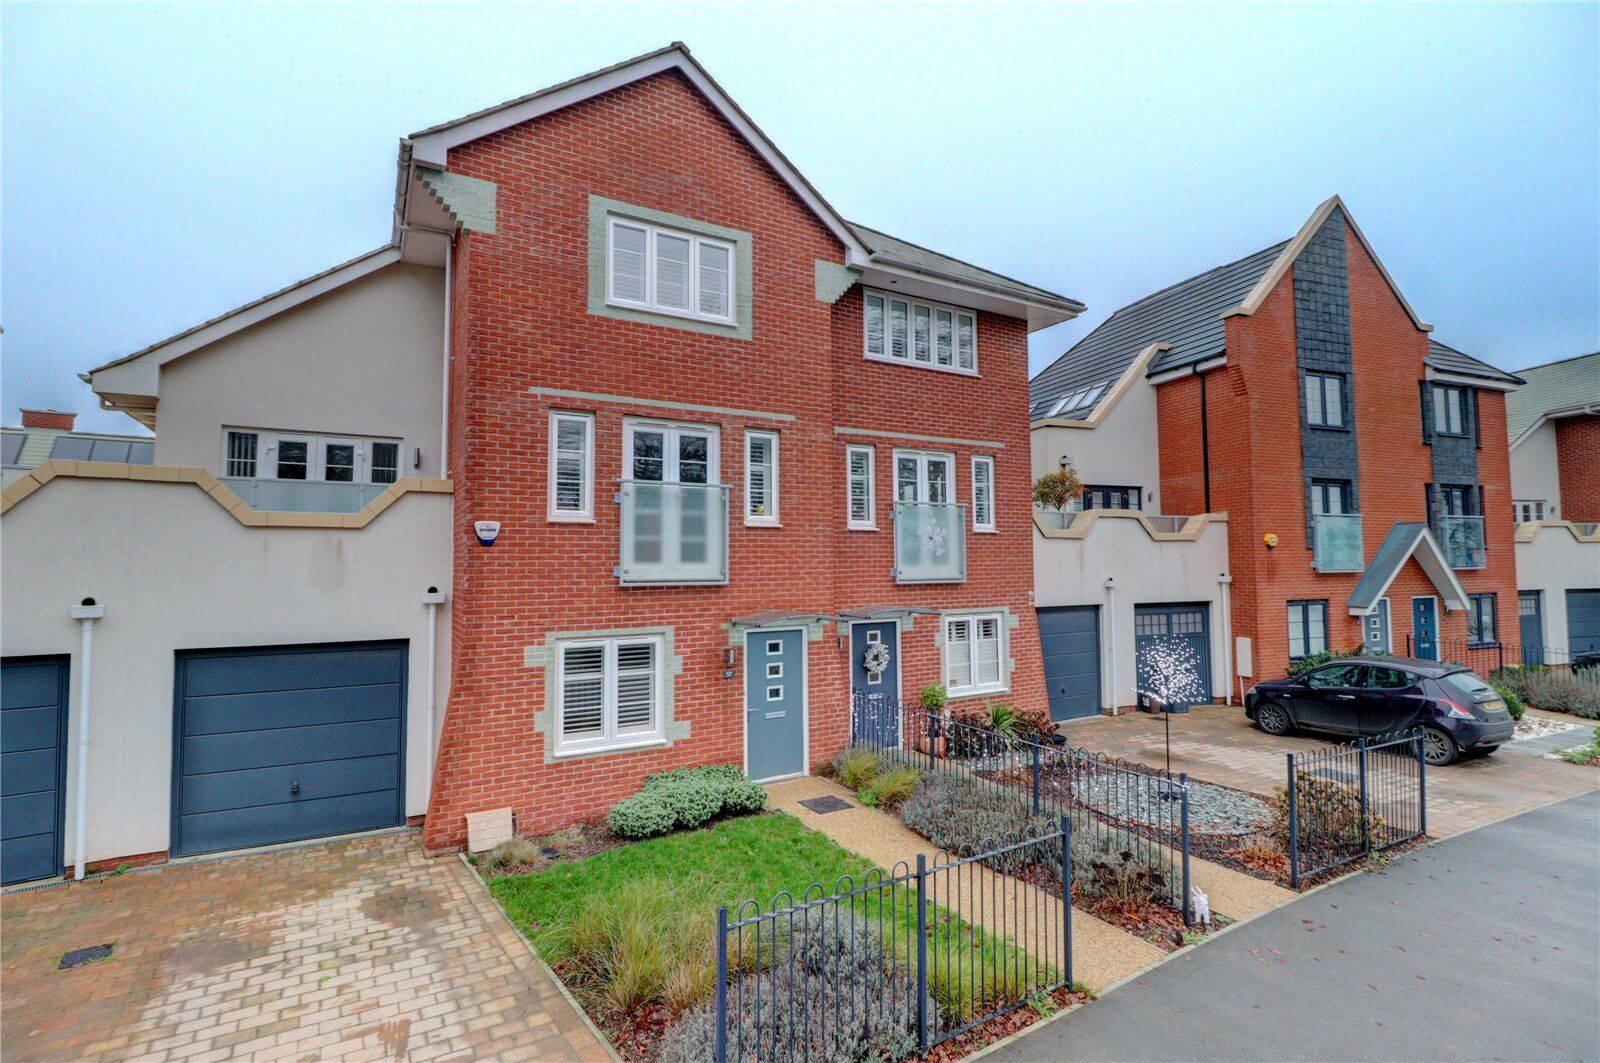 3 bedroom semi detached house for sale Kennedy Avenue, High Wycombe, HP11, main image